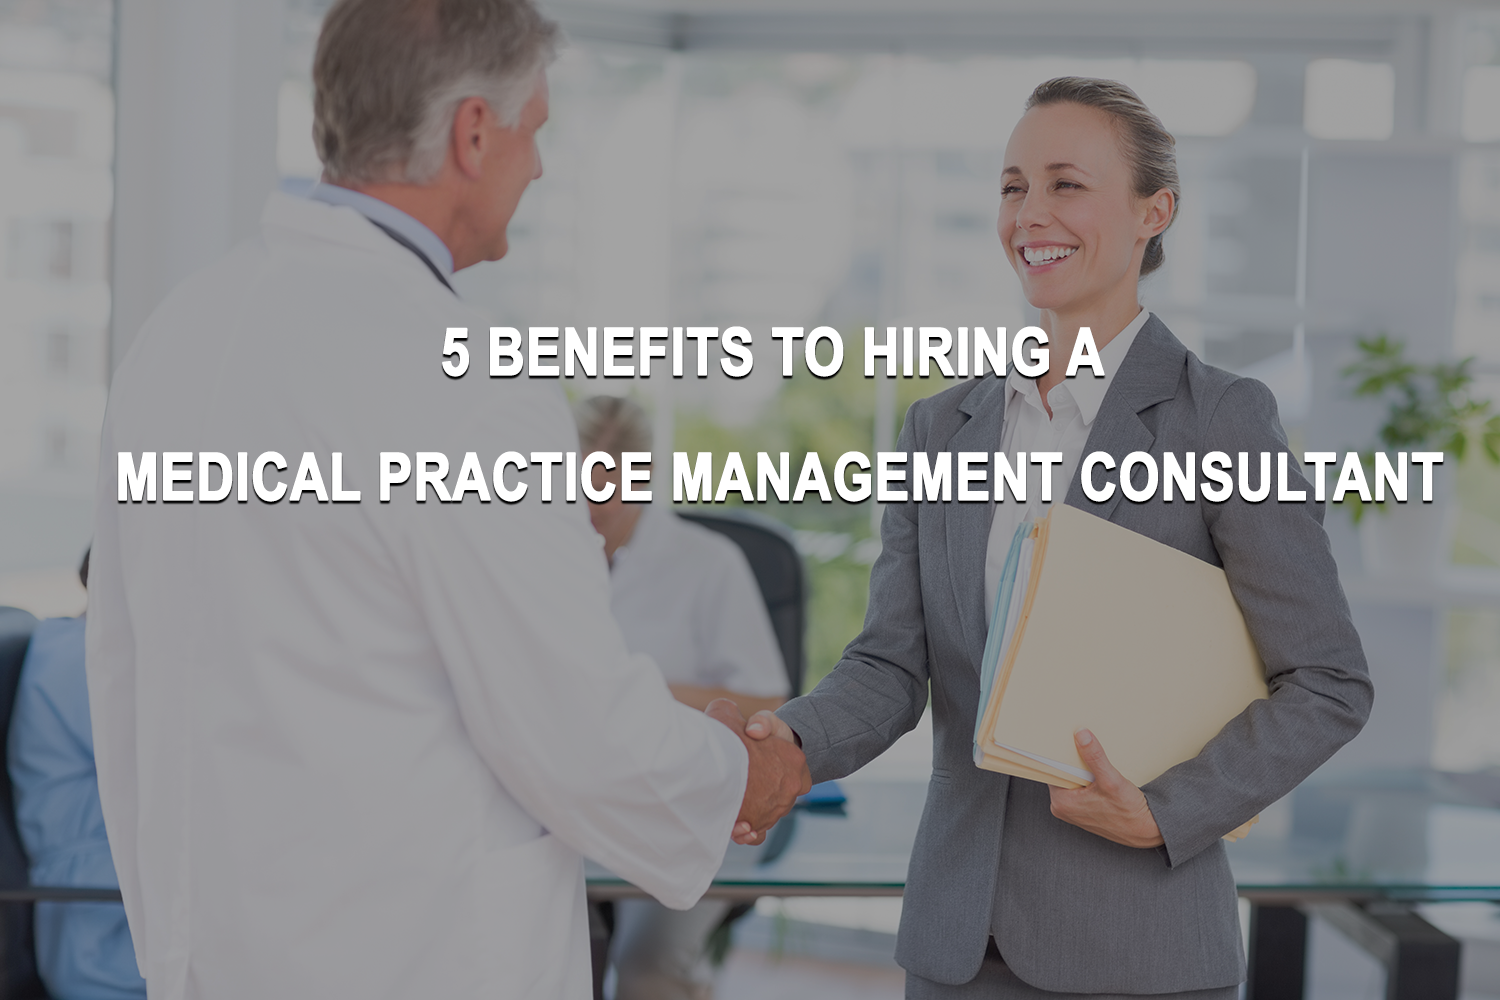 5 BENEFITS TO HIRING A MEDICAL PRACTICE MANAGEMENT CONSULTANT